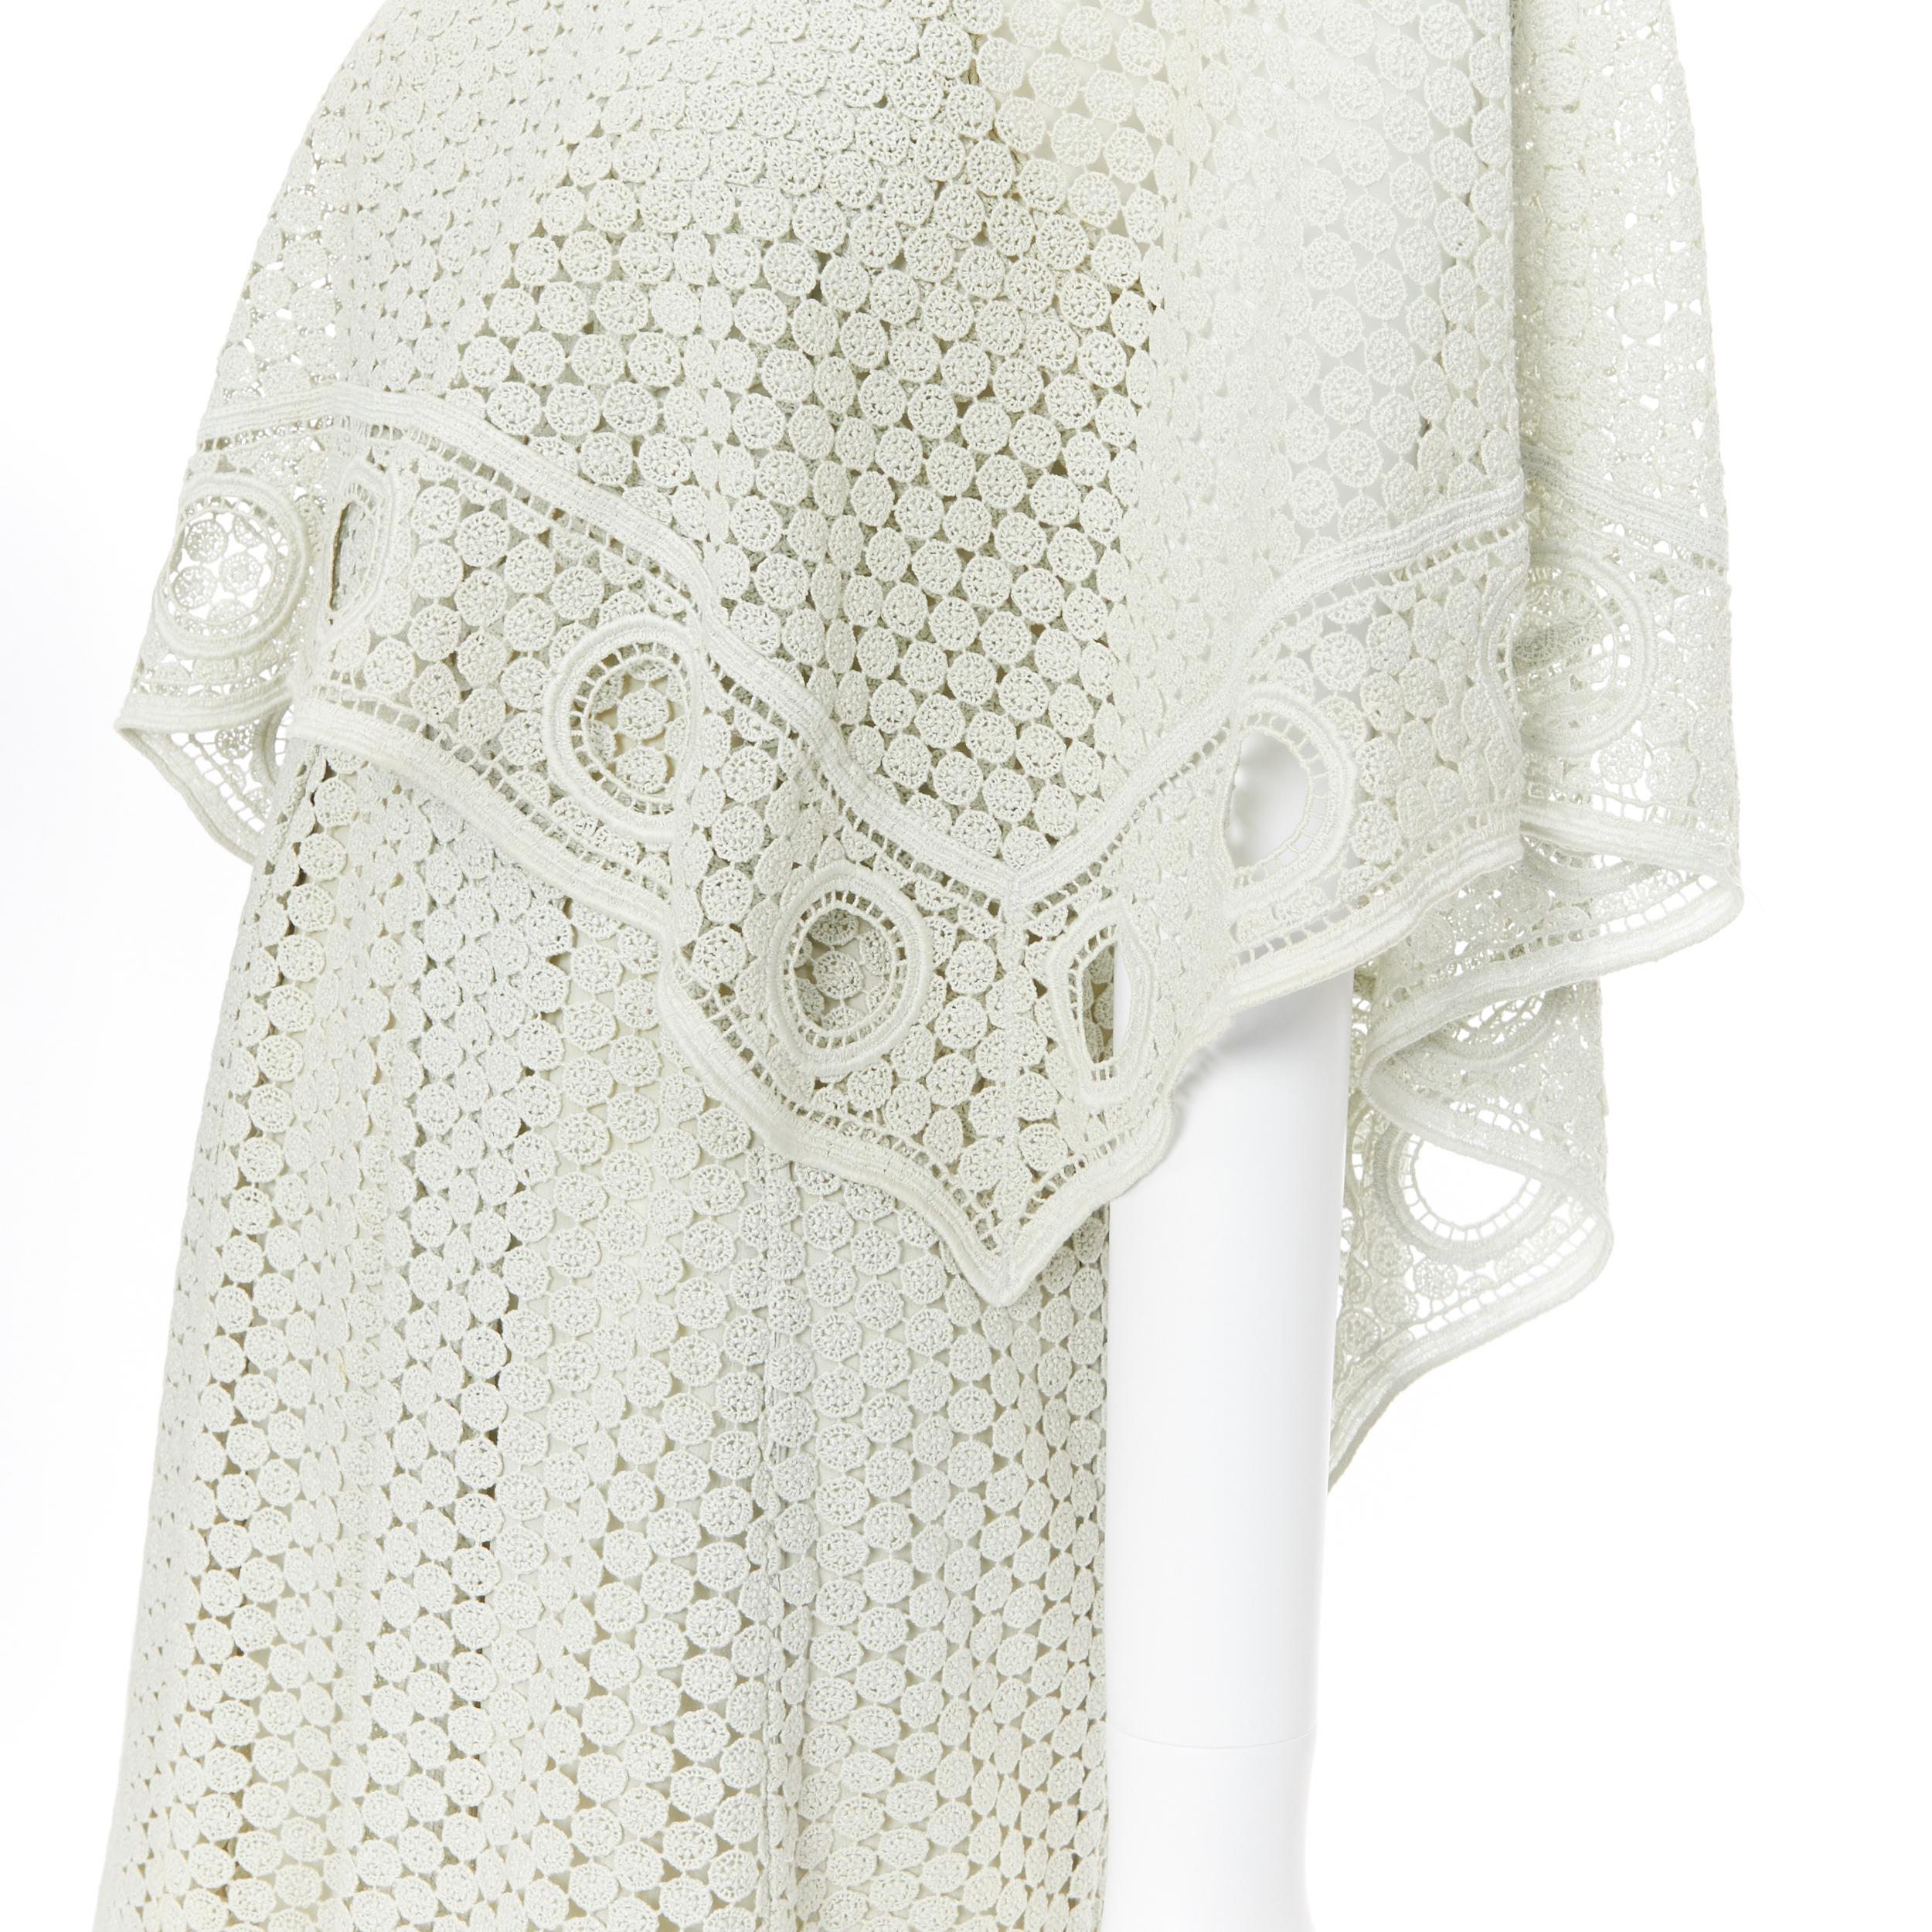 runway CHLOE mint green embroidery anglais eyelet handkerchief layared dress XS
Brand: Chloe
Model Name / Style: Eyelet dress
Material: Cotton blend
Color: Green, faded mint
Pattern: Solid
Closure: Zip
Extra Detail: Layered design,
Made in: